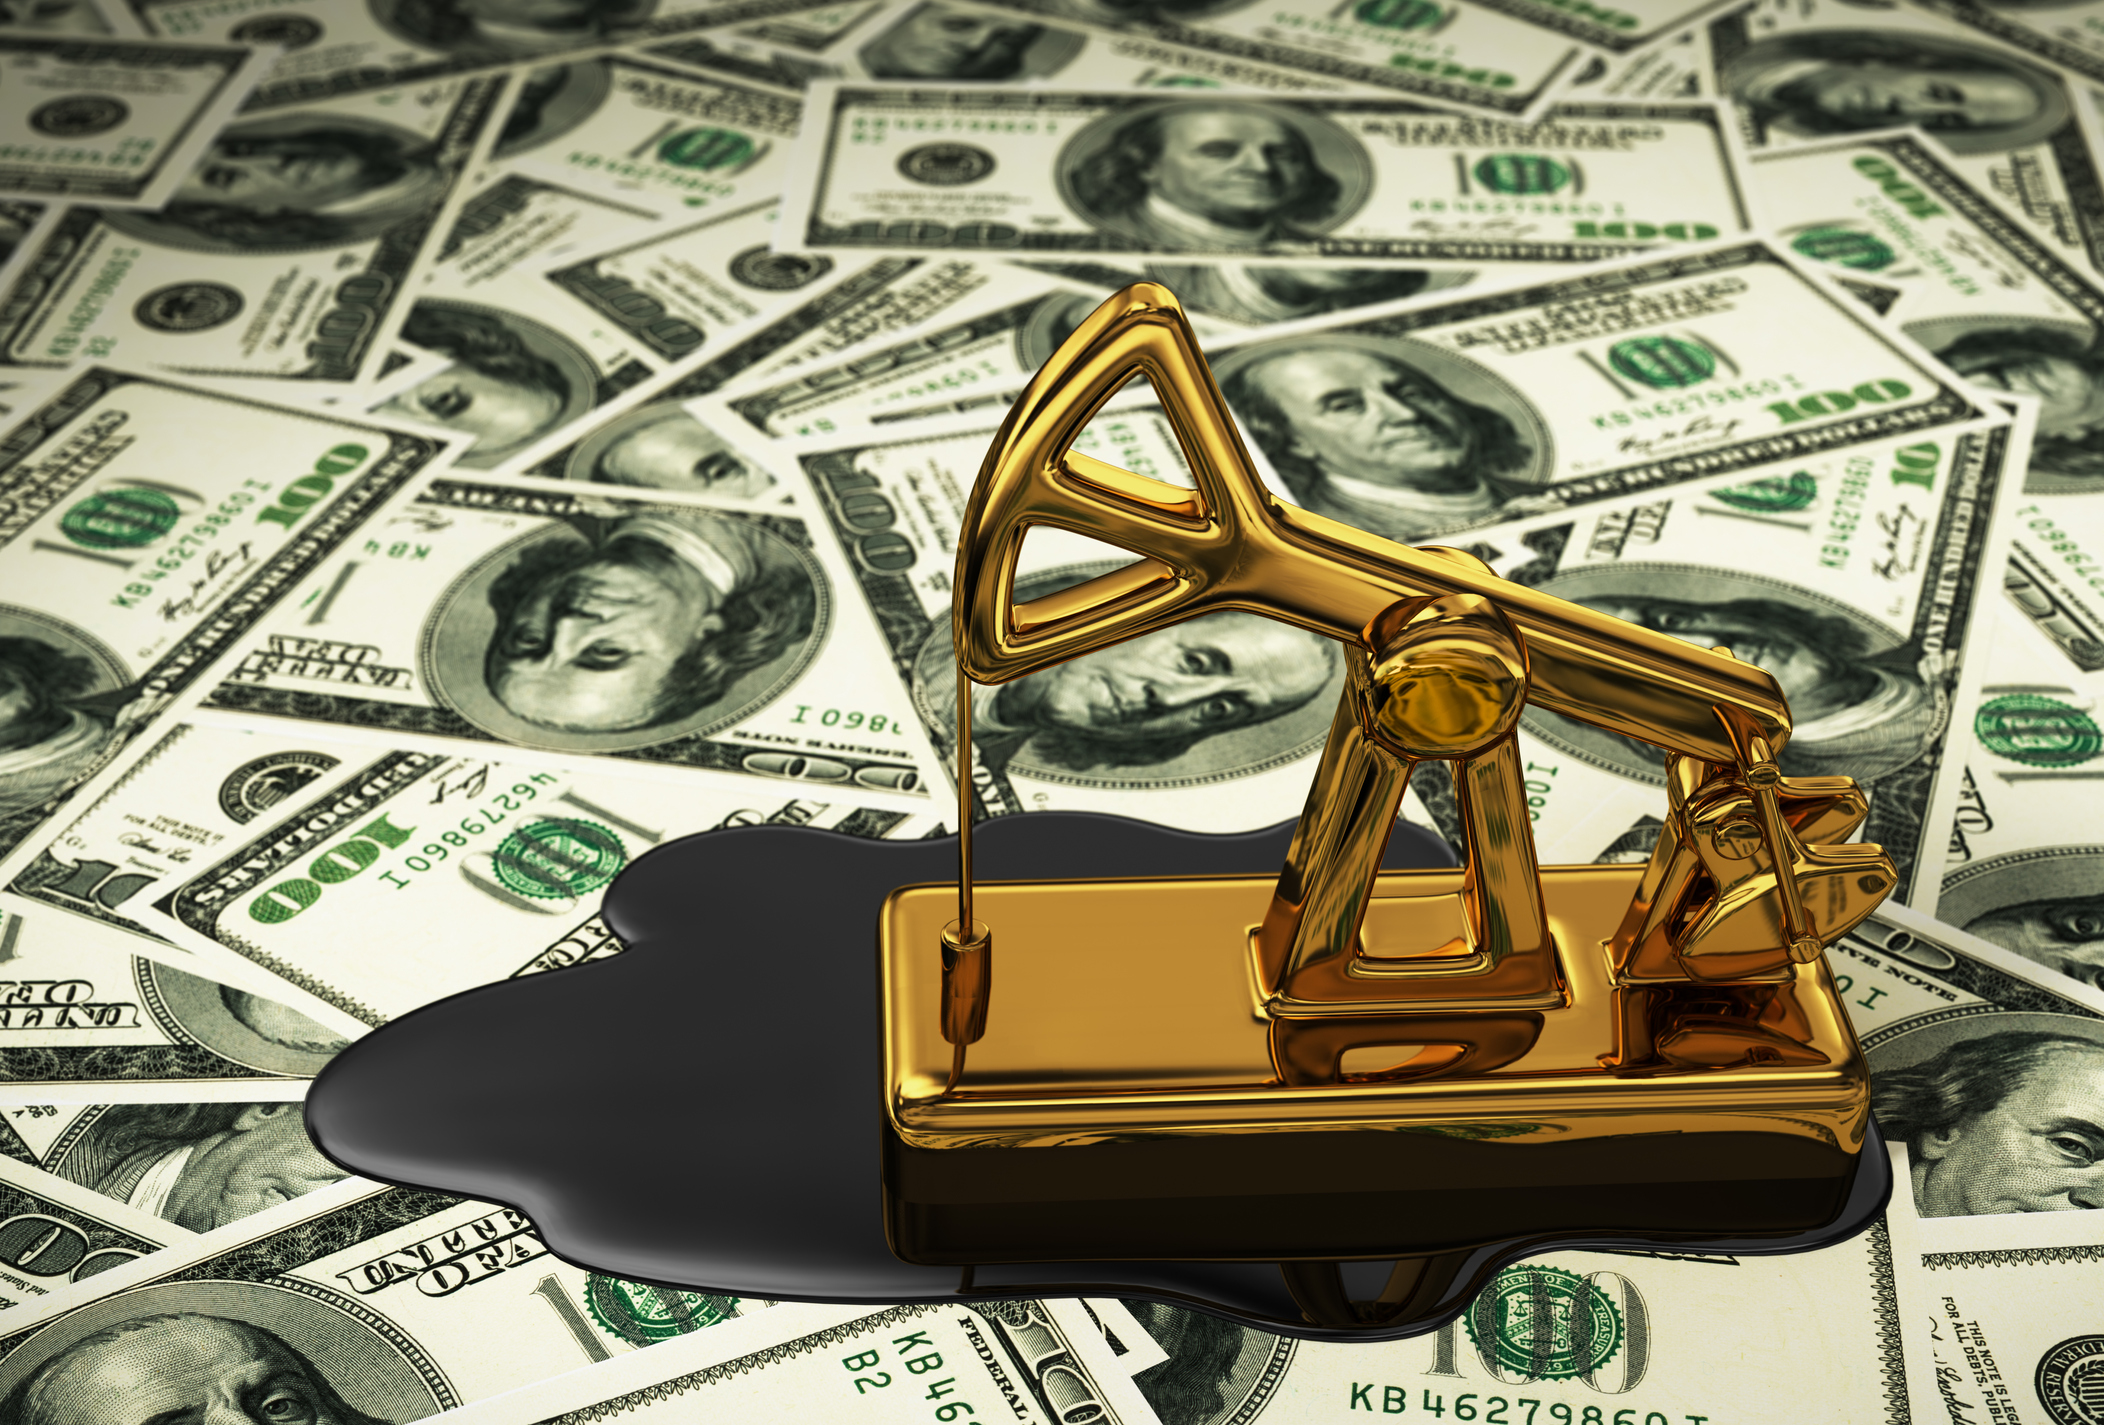 SEC Charges Texas Businessman and Others in Oil and Gas Ponzi Scheme